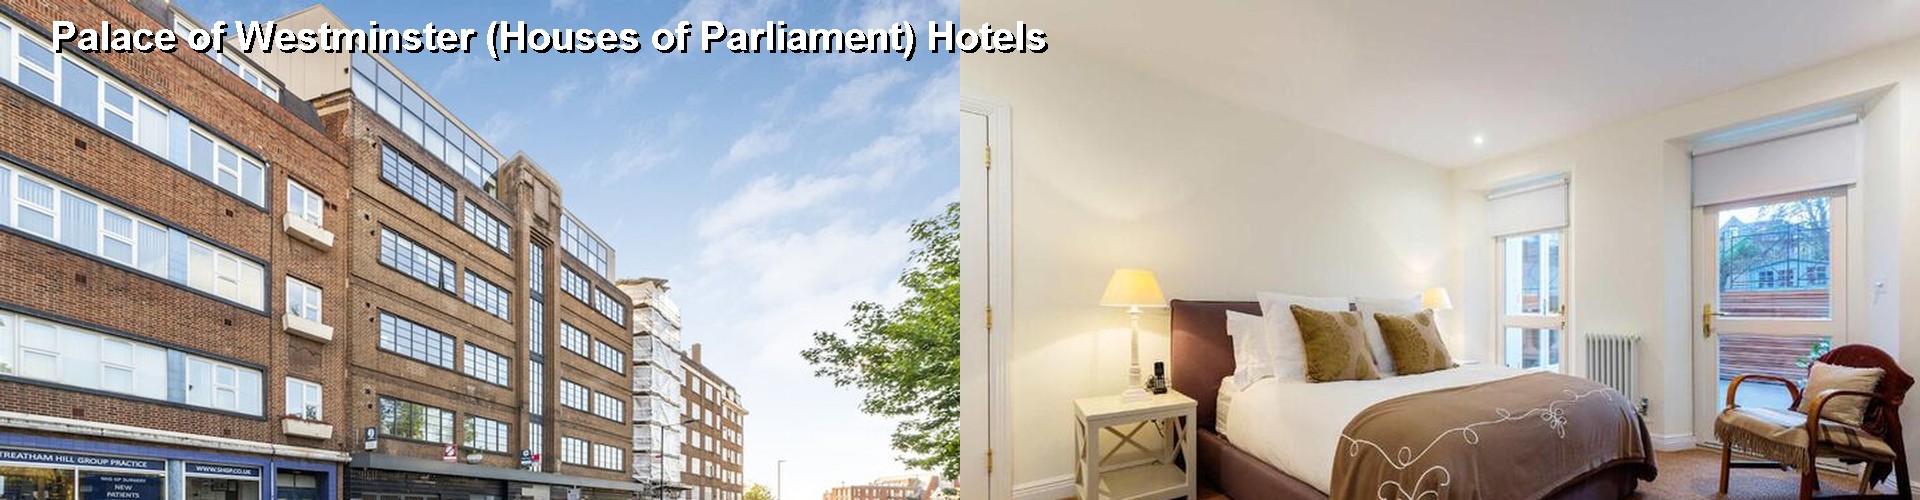 5 Best Hotels near Palace of Westminster (Houses of Parliament)